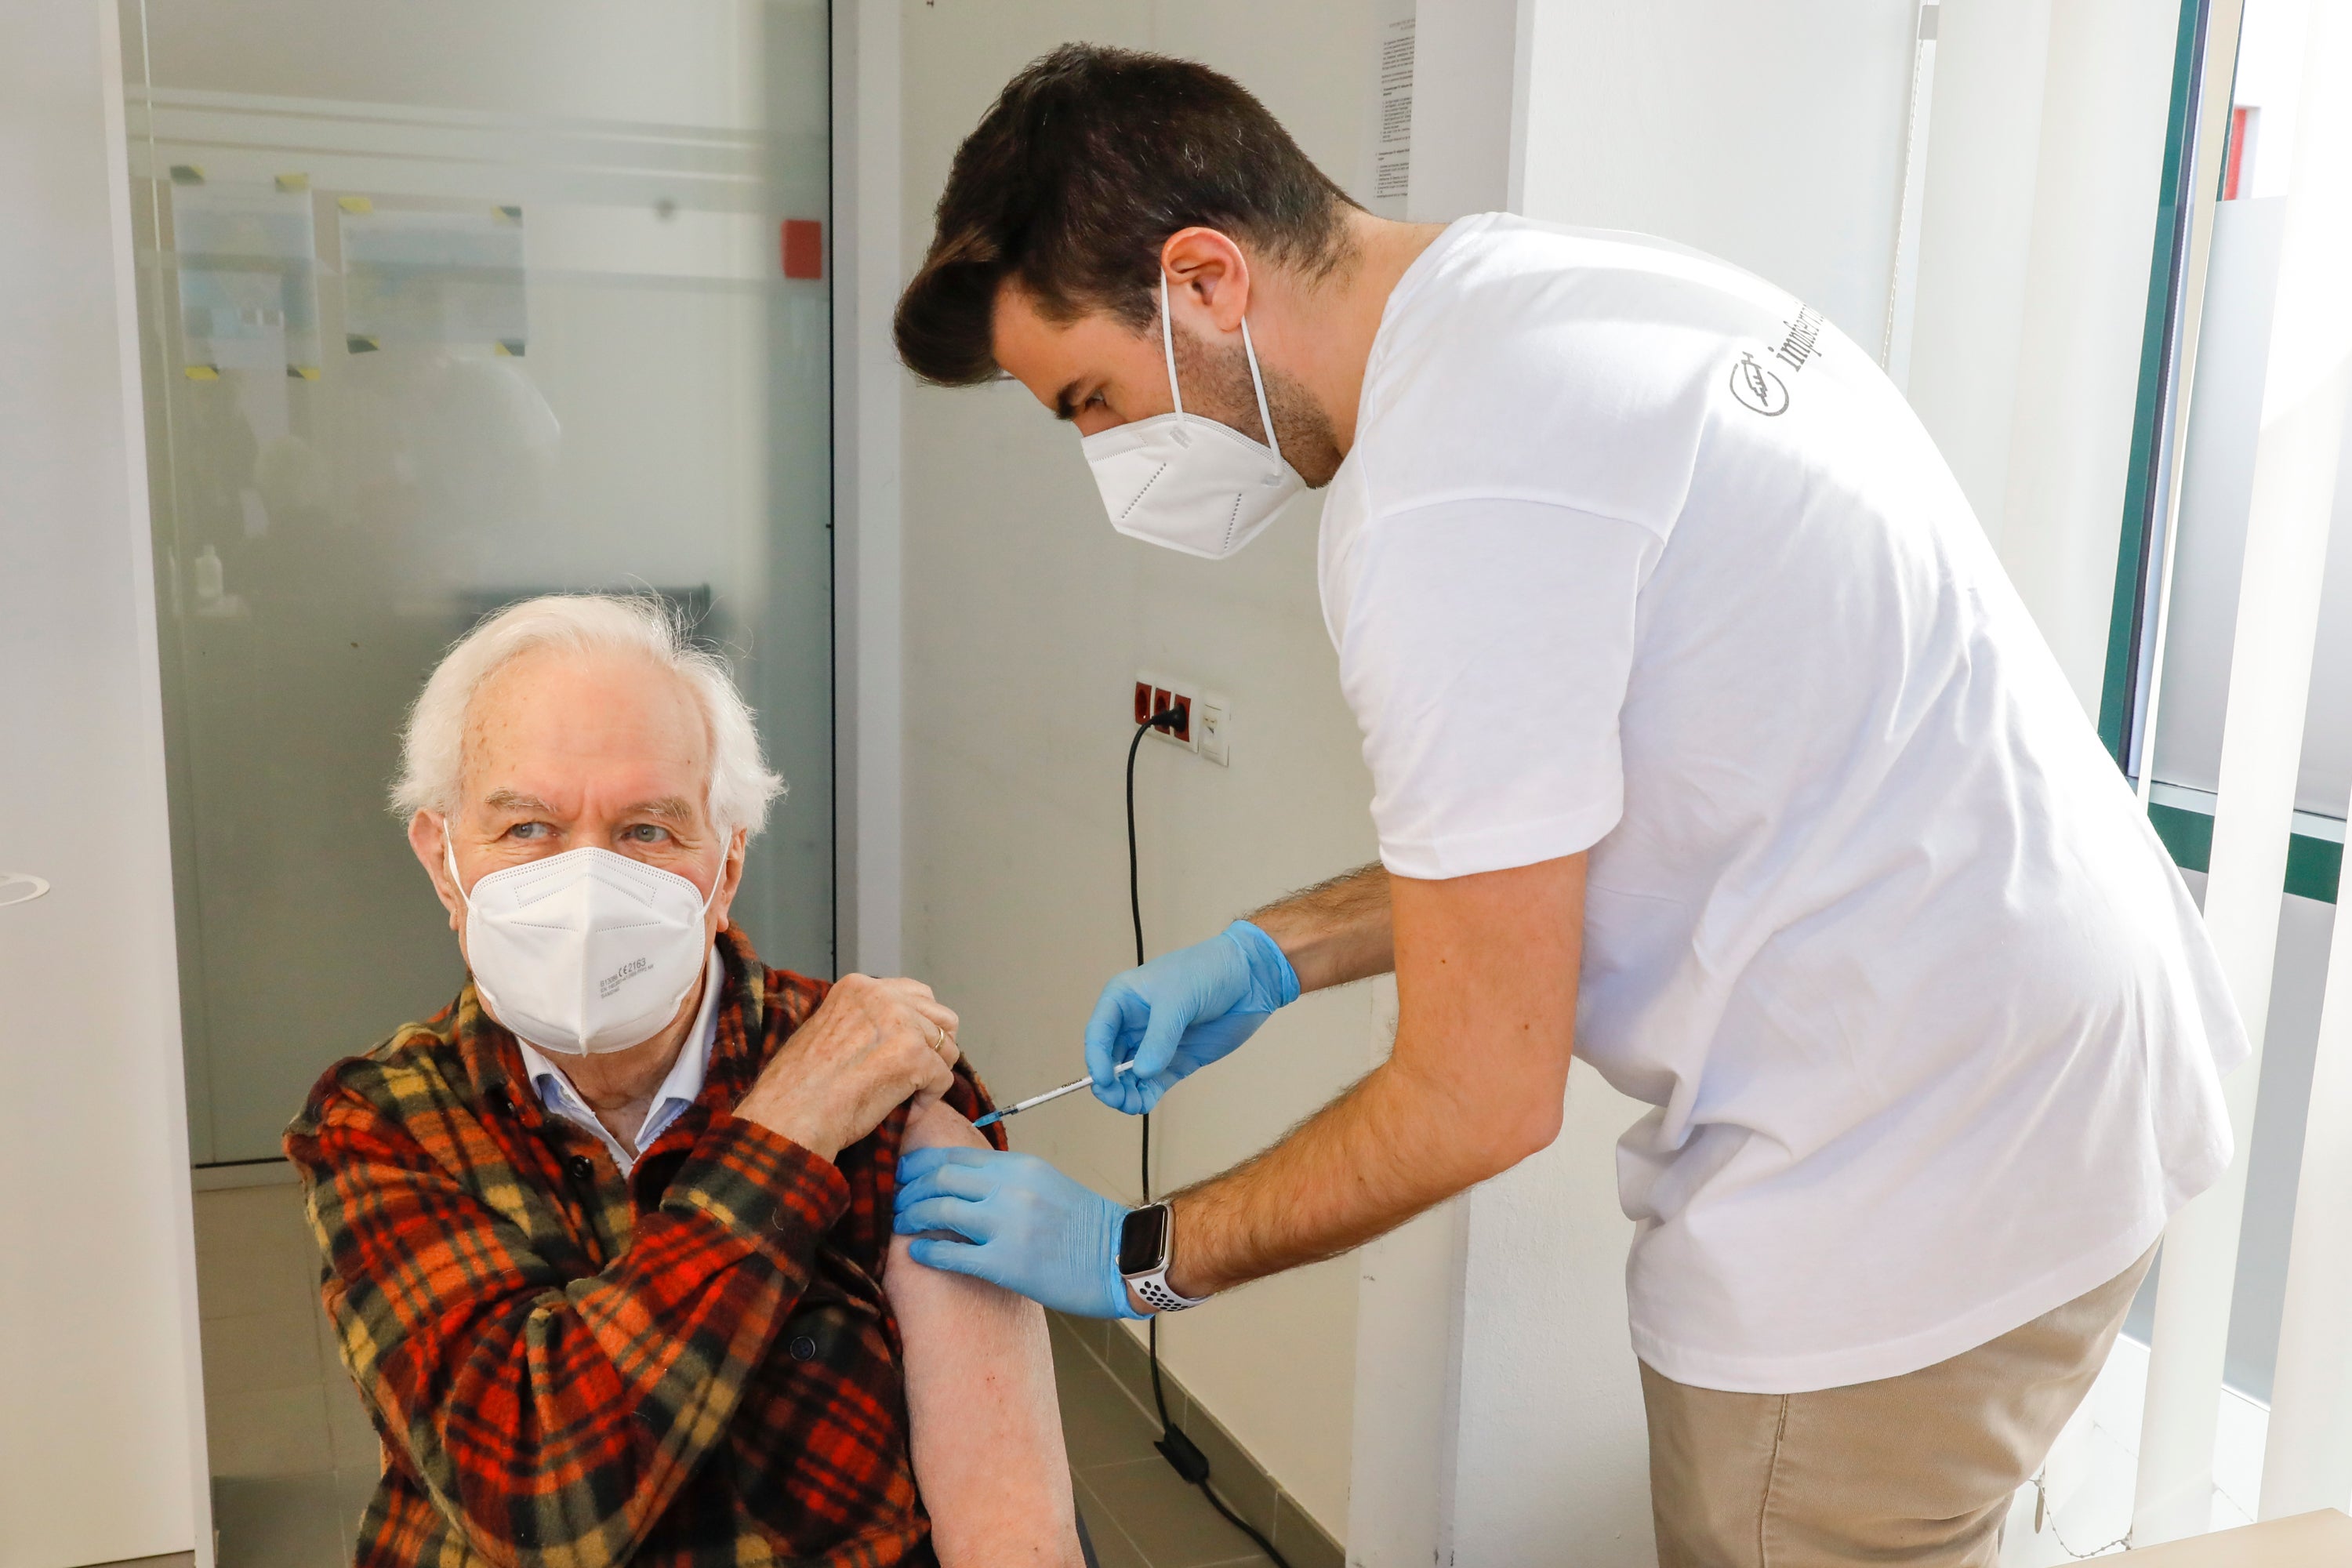 A man is vaccinated against the coronavirus in Vienna on 10 April, 2021